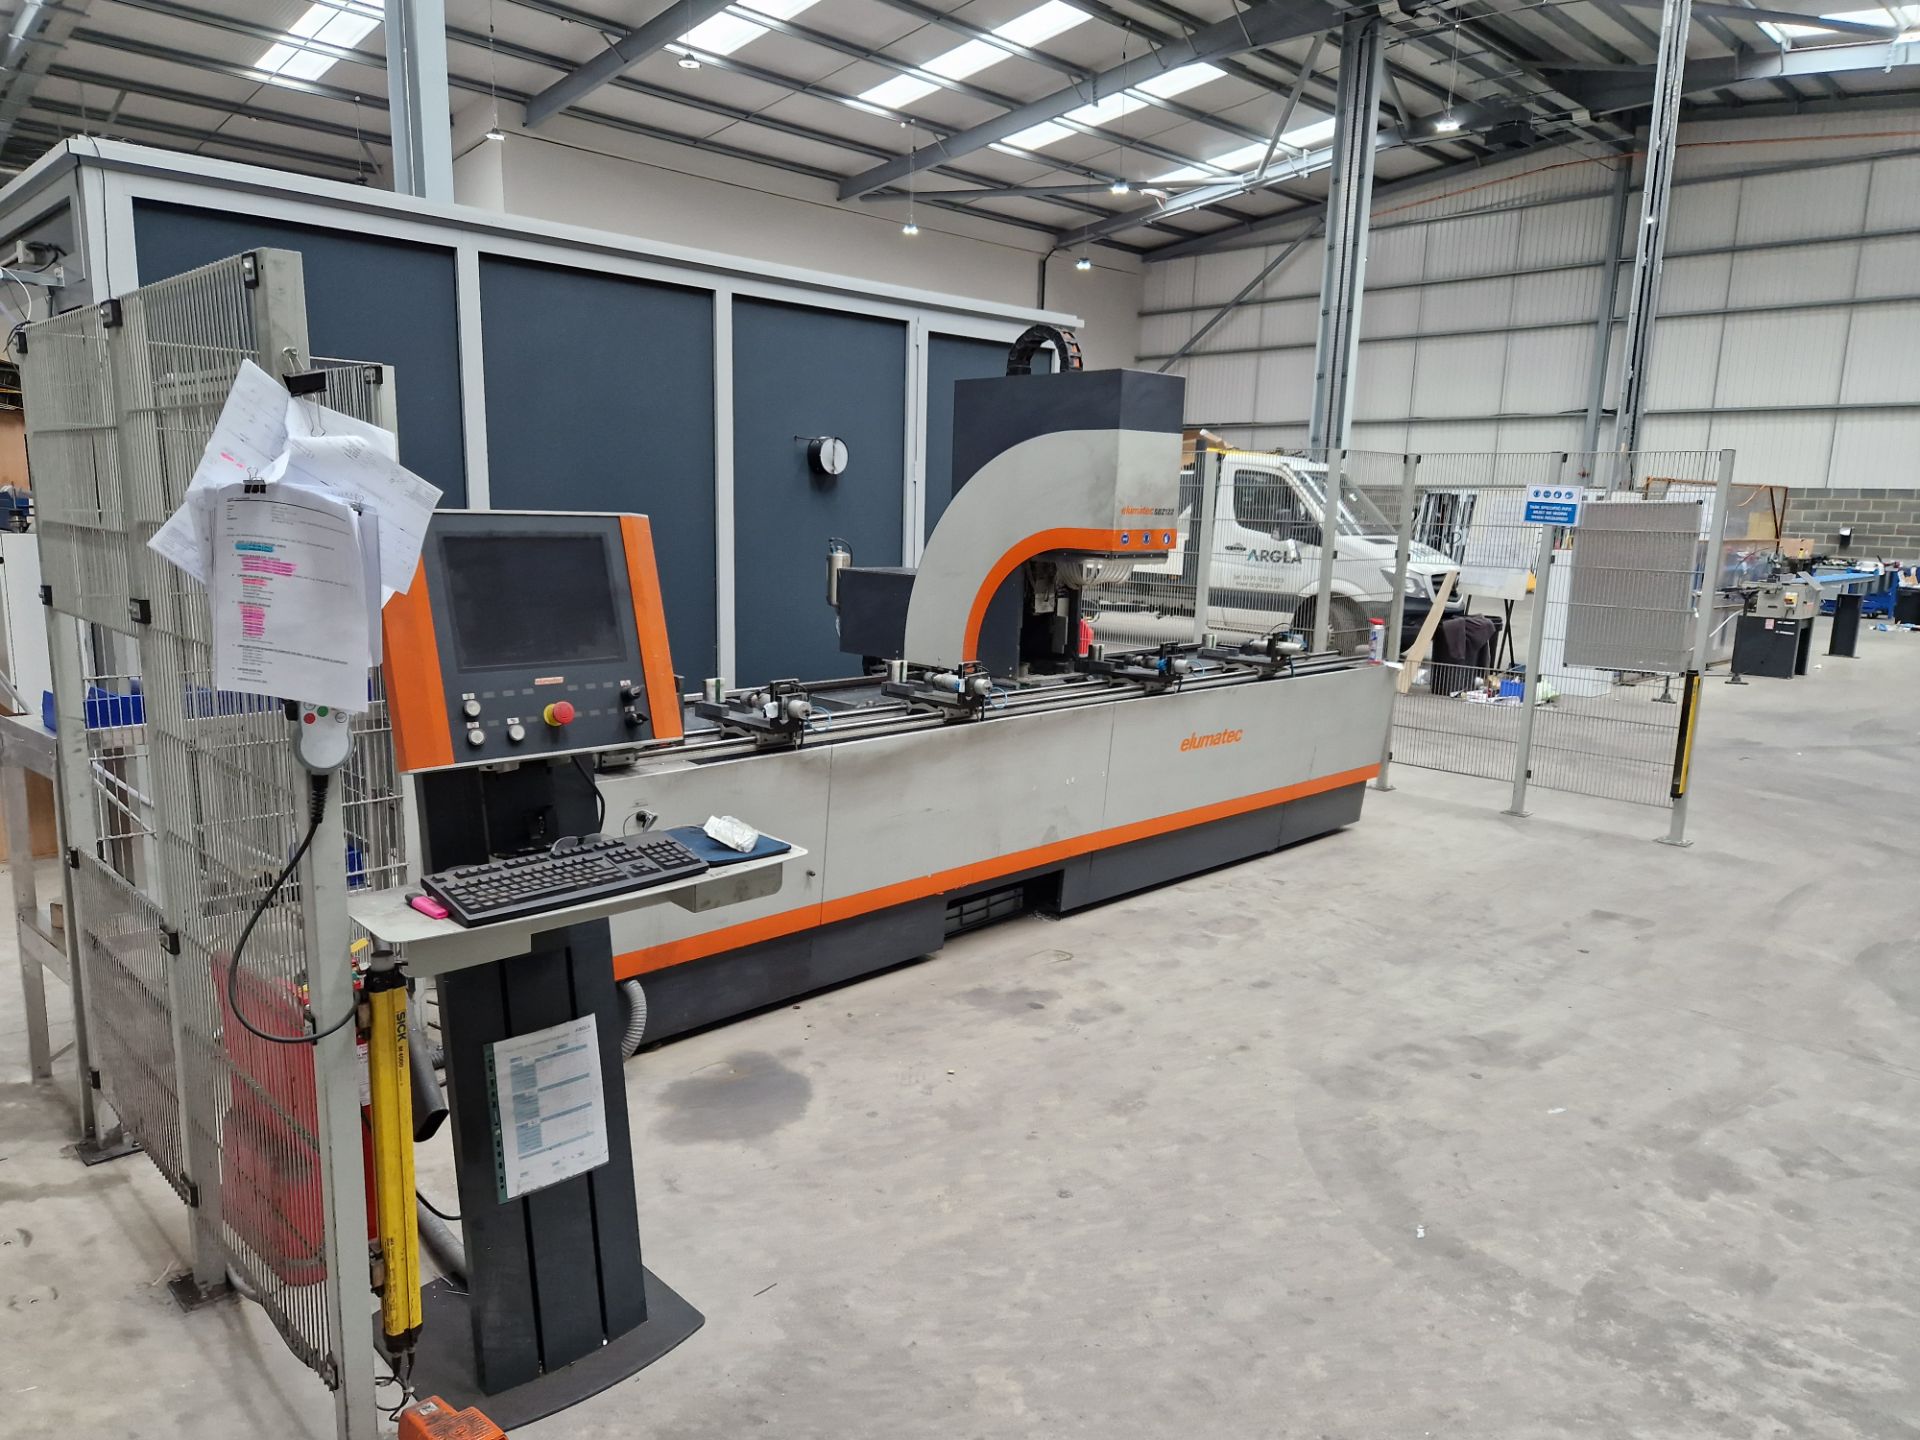 elumatec SBZ 122/33 CNC Profiling Machine, Serial No. 1223330678, Year of Manufacture 2014 with Sick - Image 2 of 8